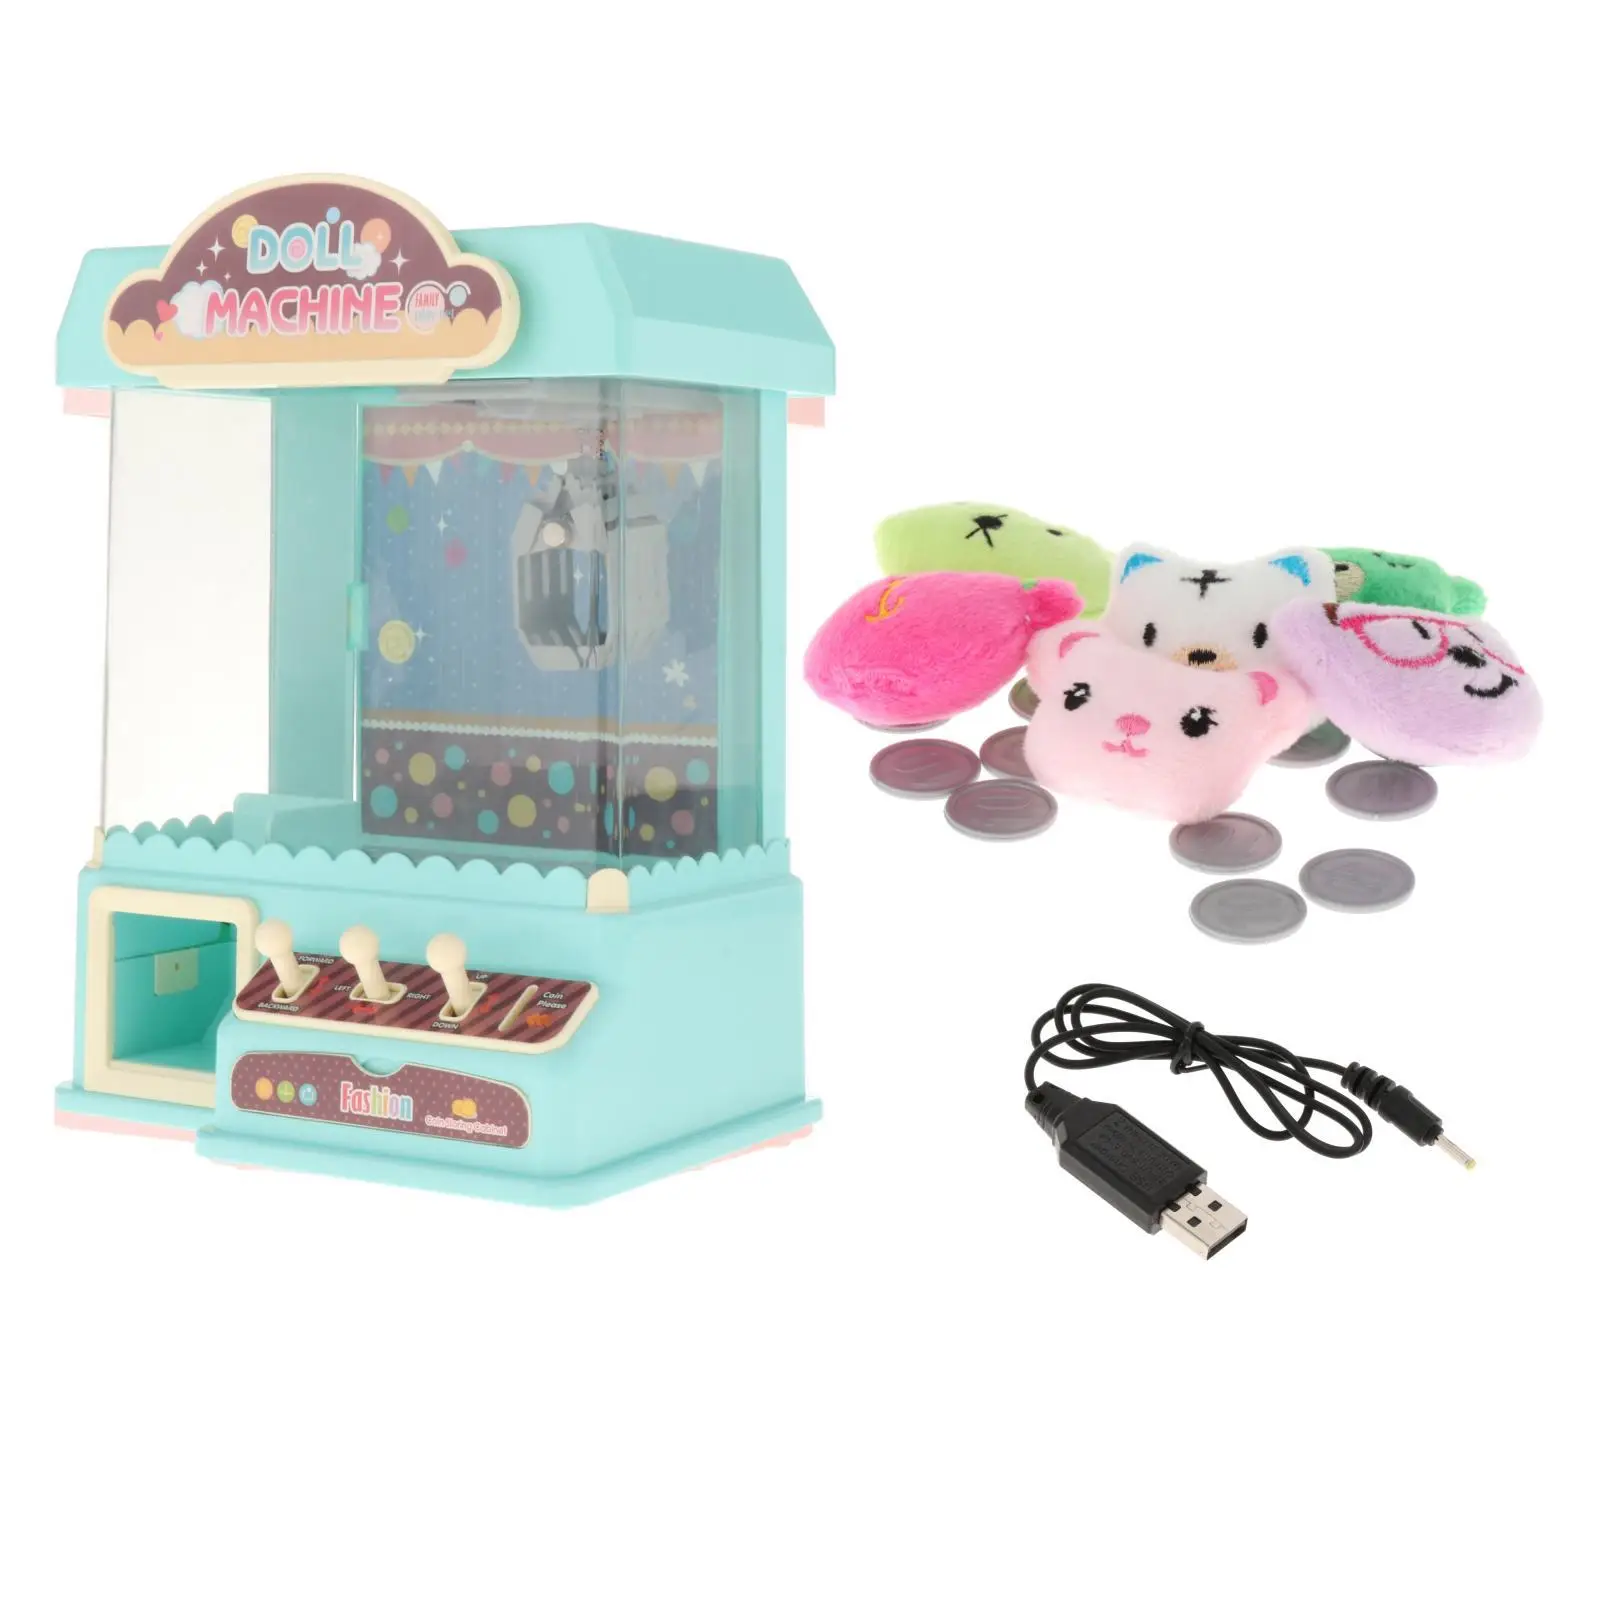 Electronic Claw Game and 10 Capsules Mini Arcade Machine for Birthday Gifts